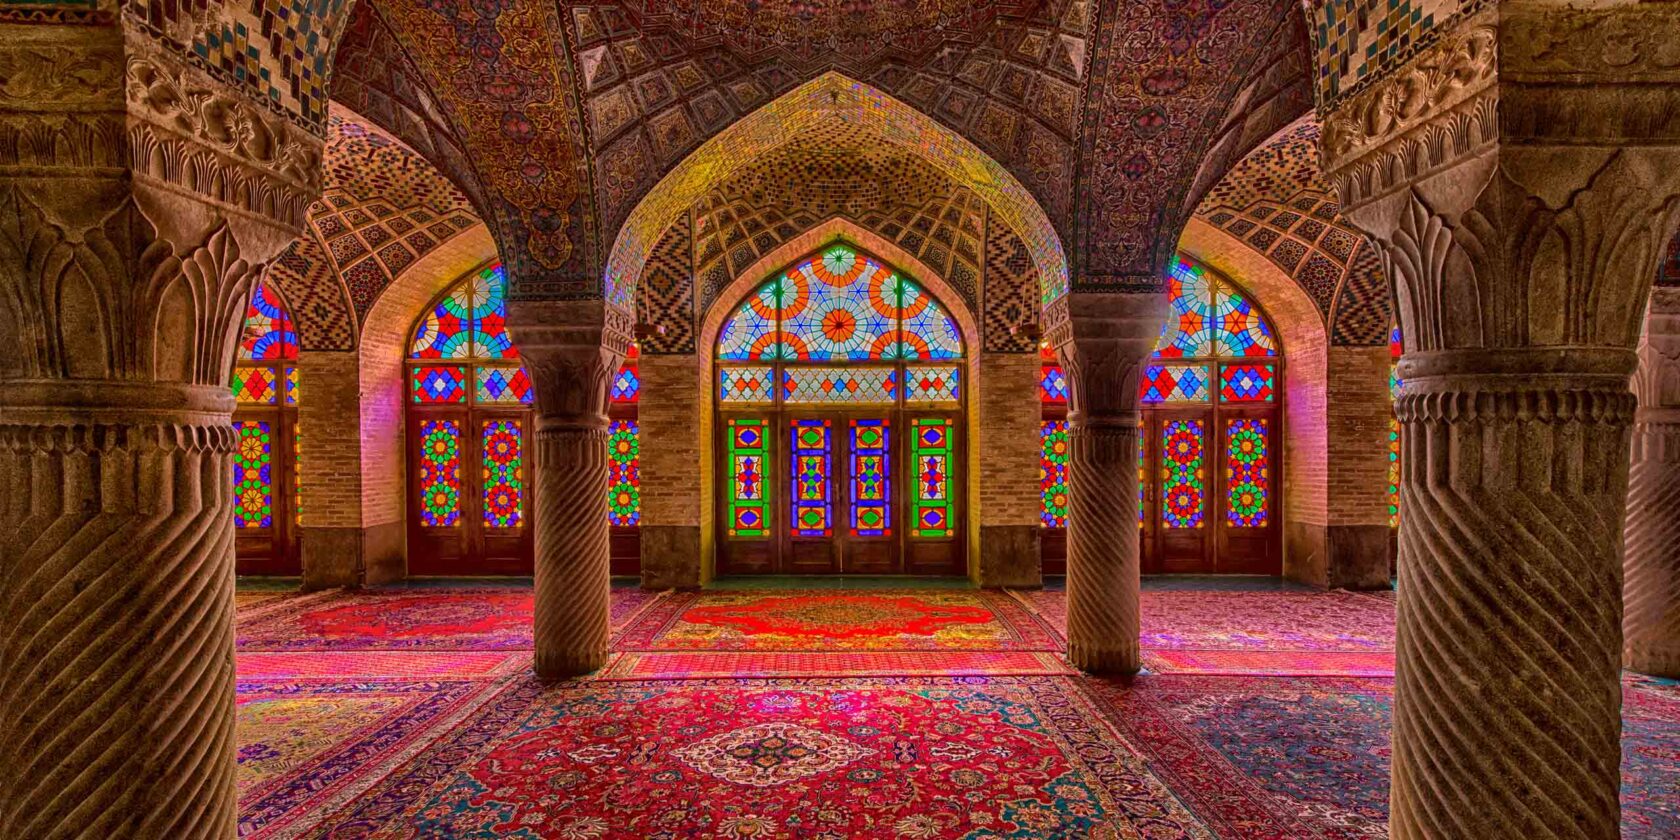 Interior with beautiful and artistic windows with stained glass inside the Nasir ol Molk Mosque (also "Pink Mosque) in Shiraz, Iran.